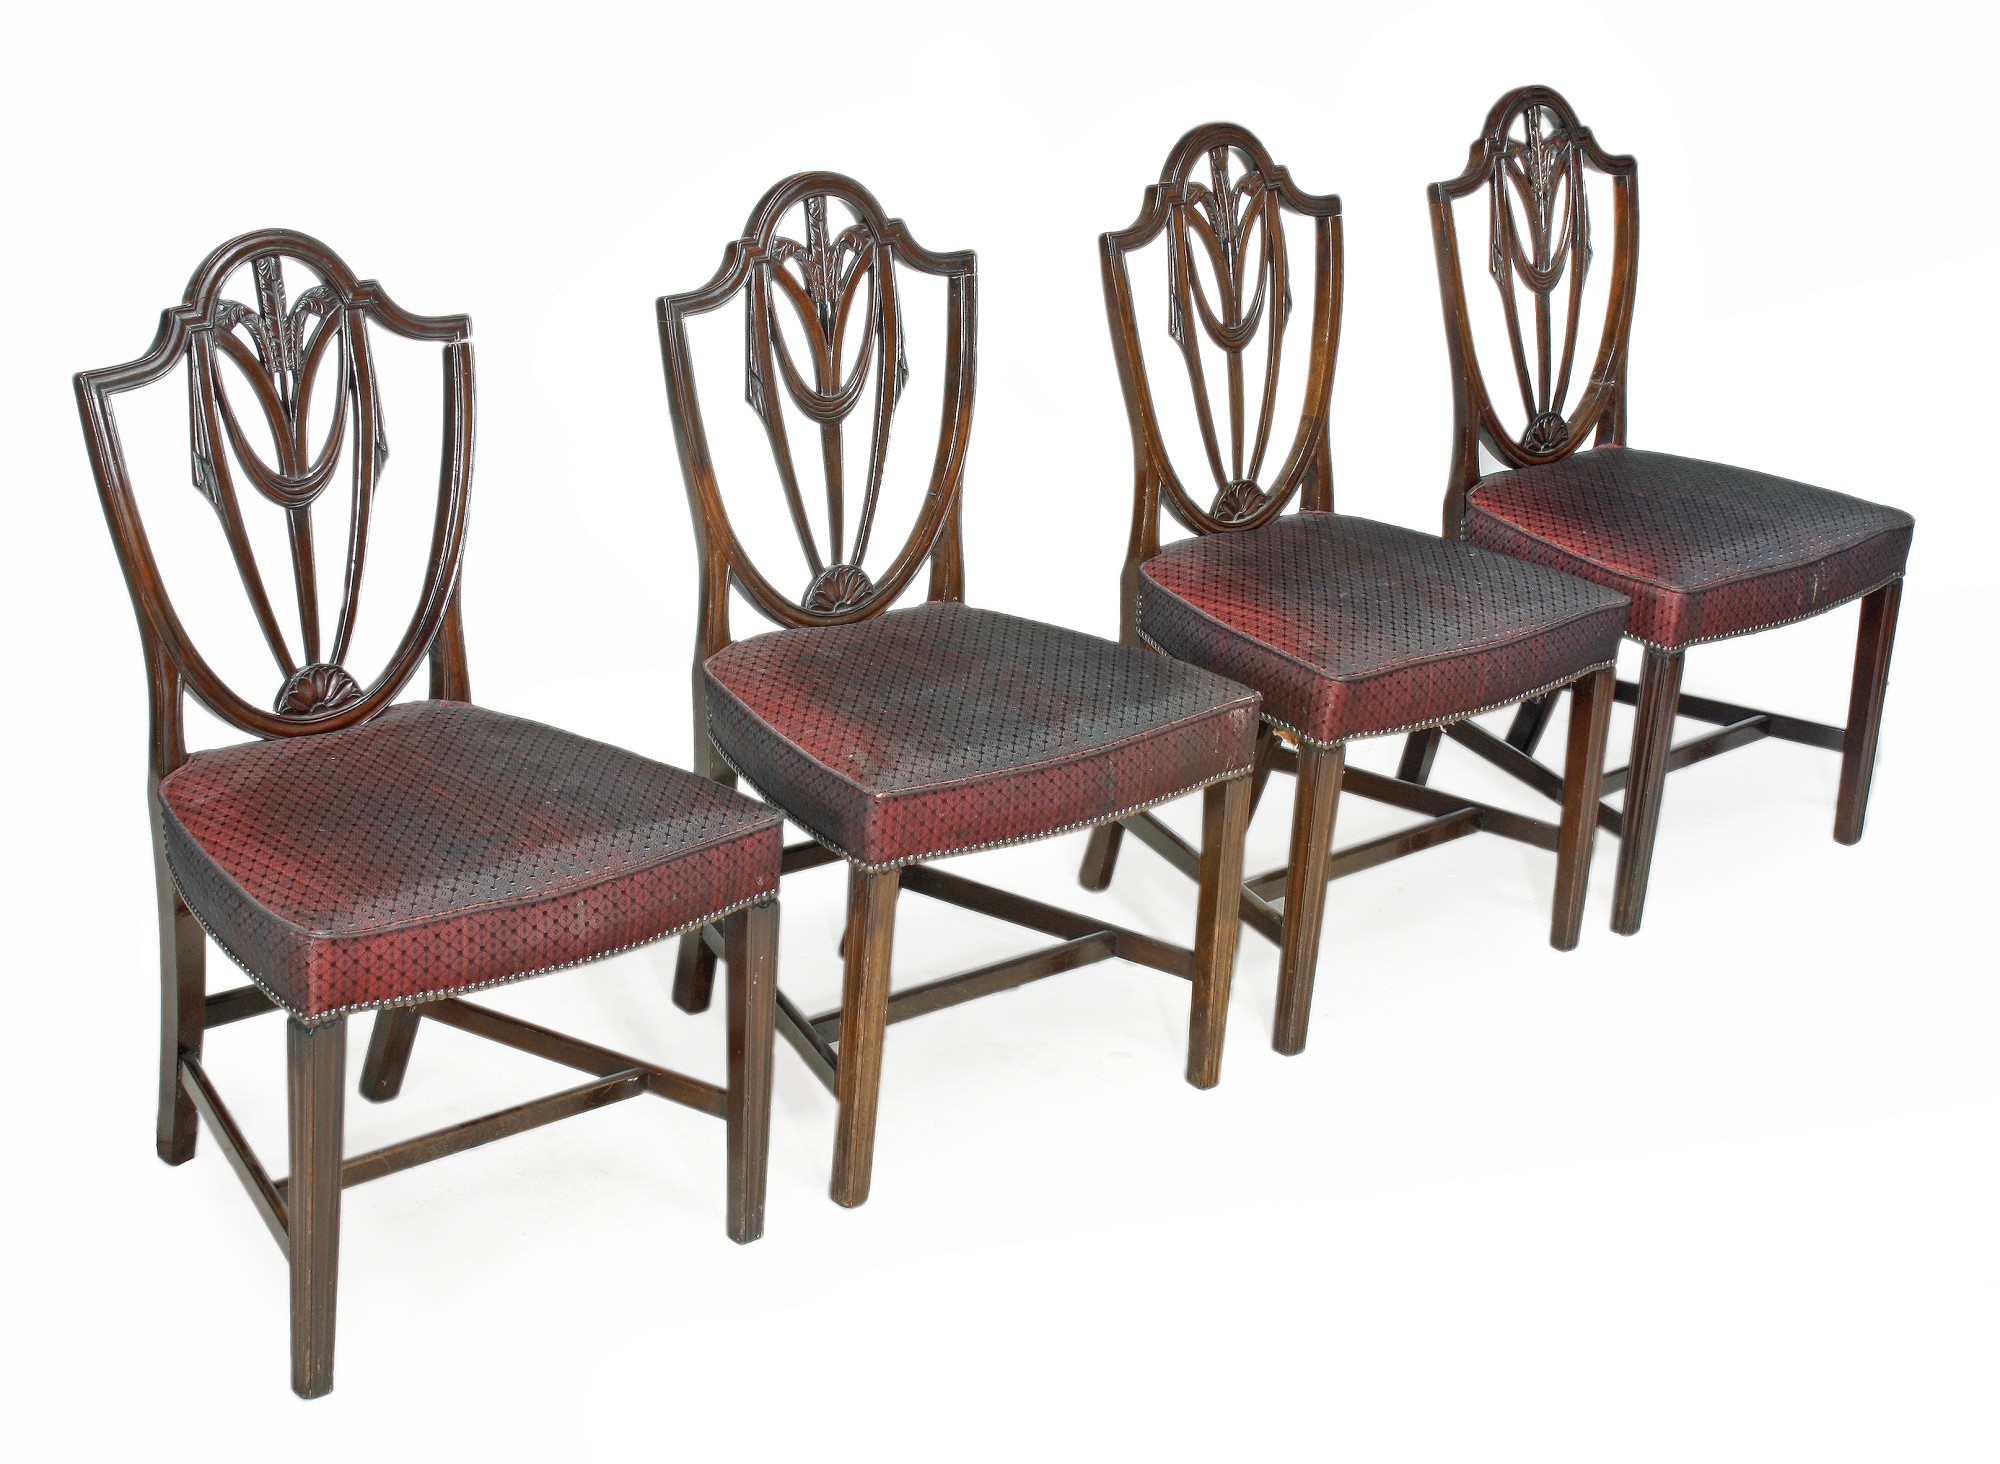 A set of four mahogany chairs, in George III style